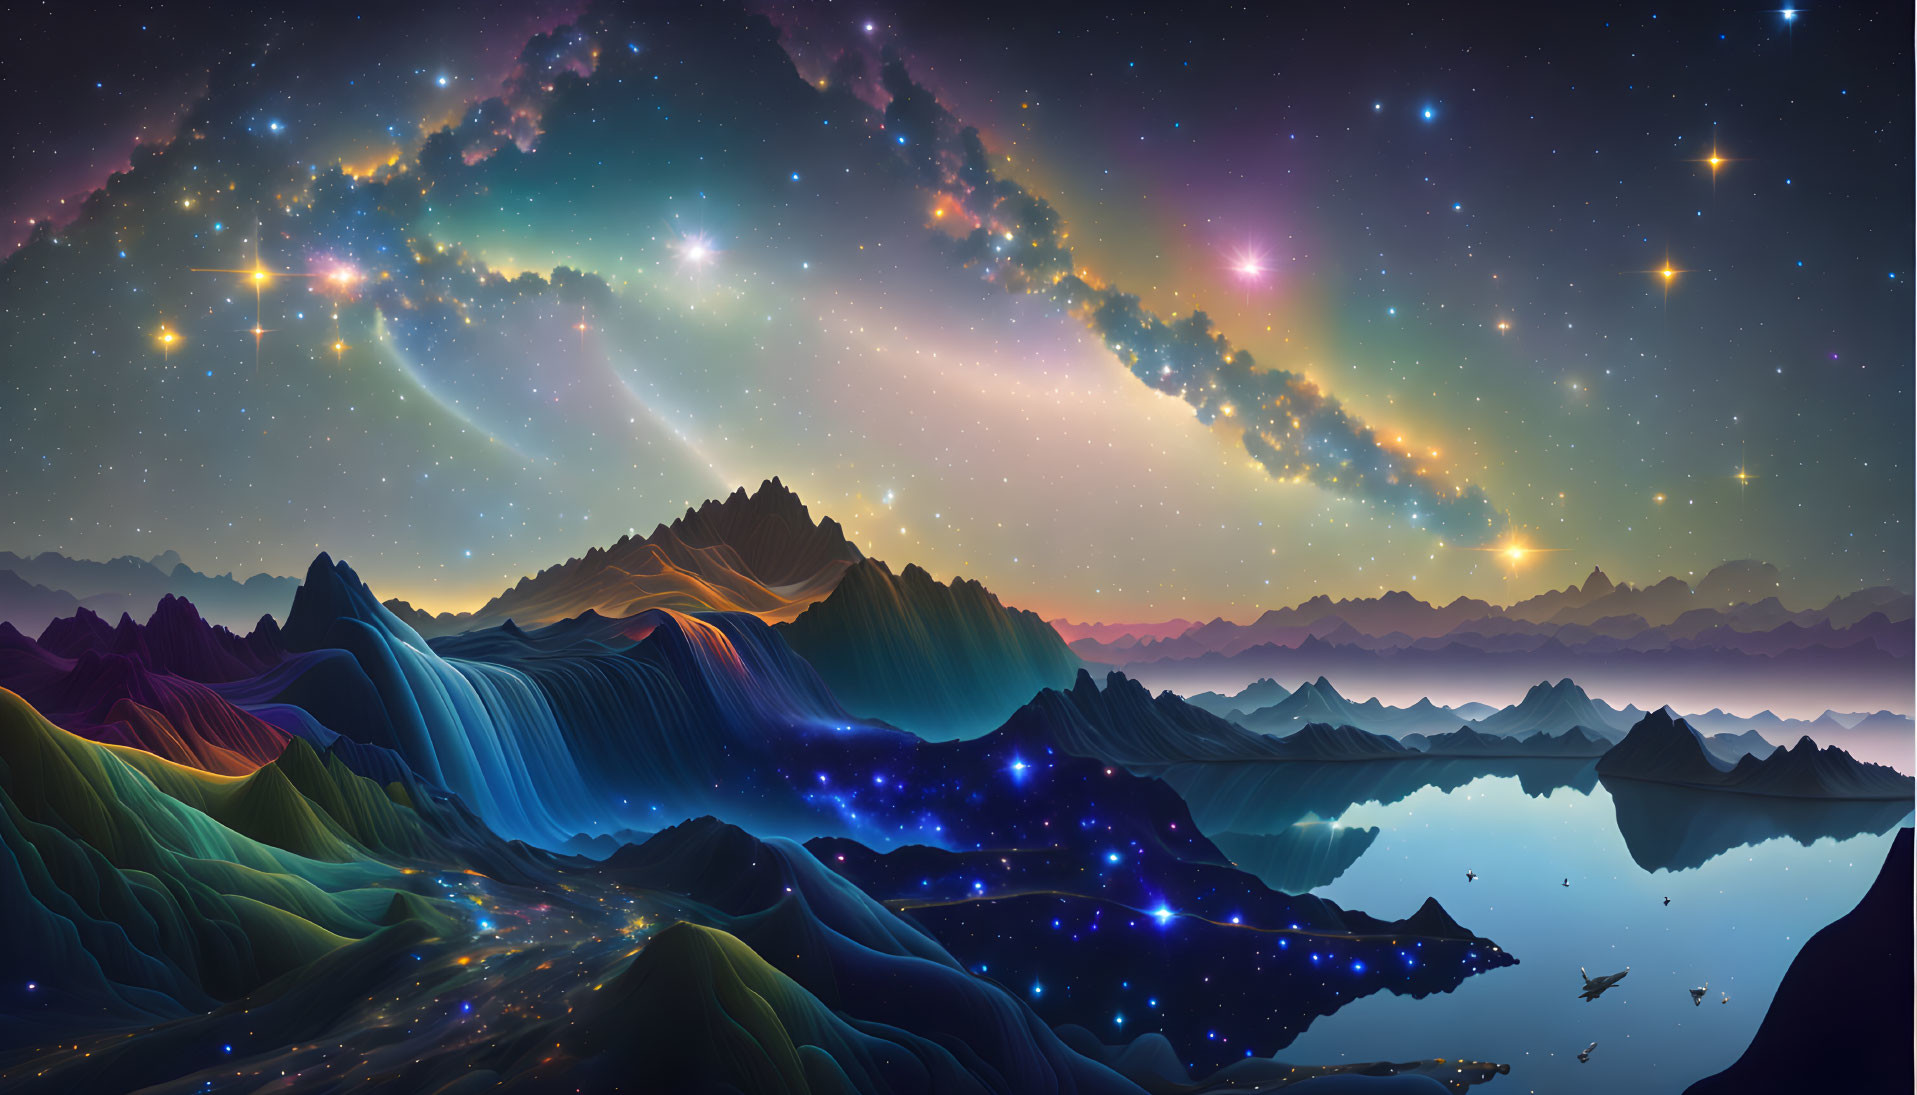 Colorful surreal digital artwork of starry skies over mountainous landscape